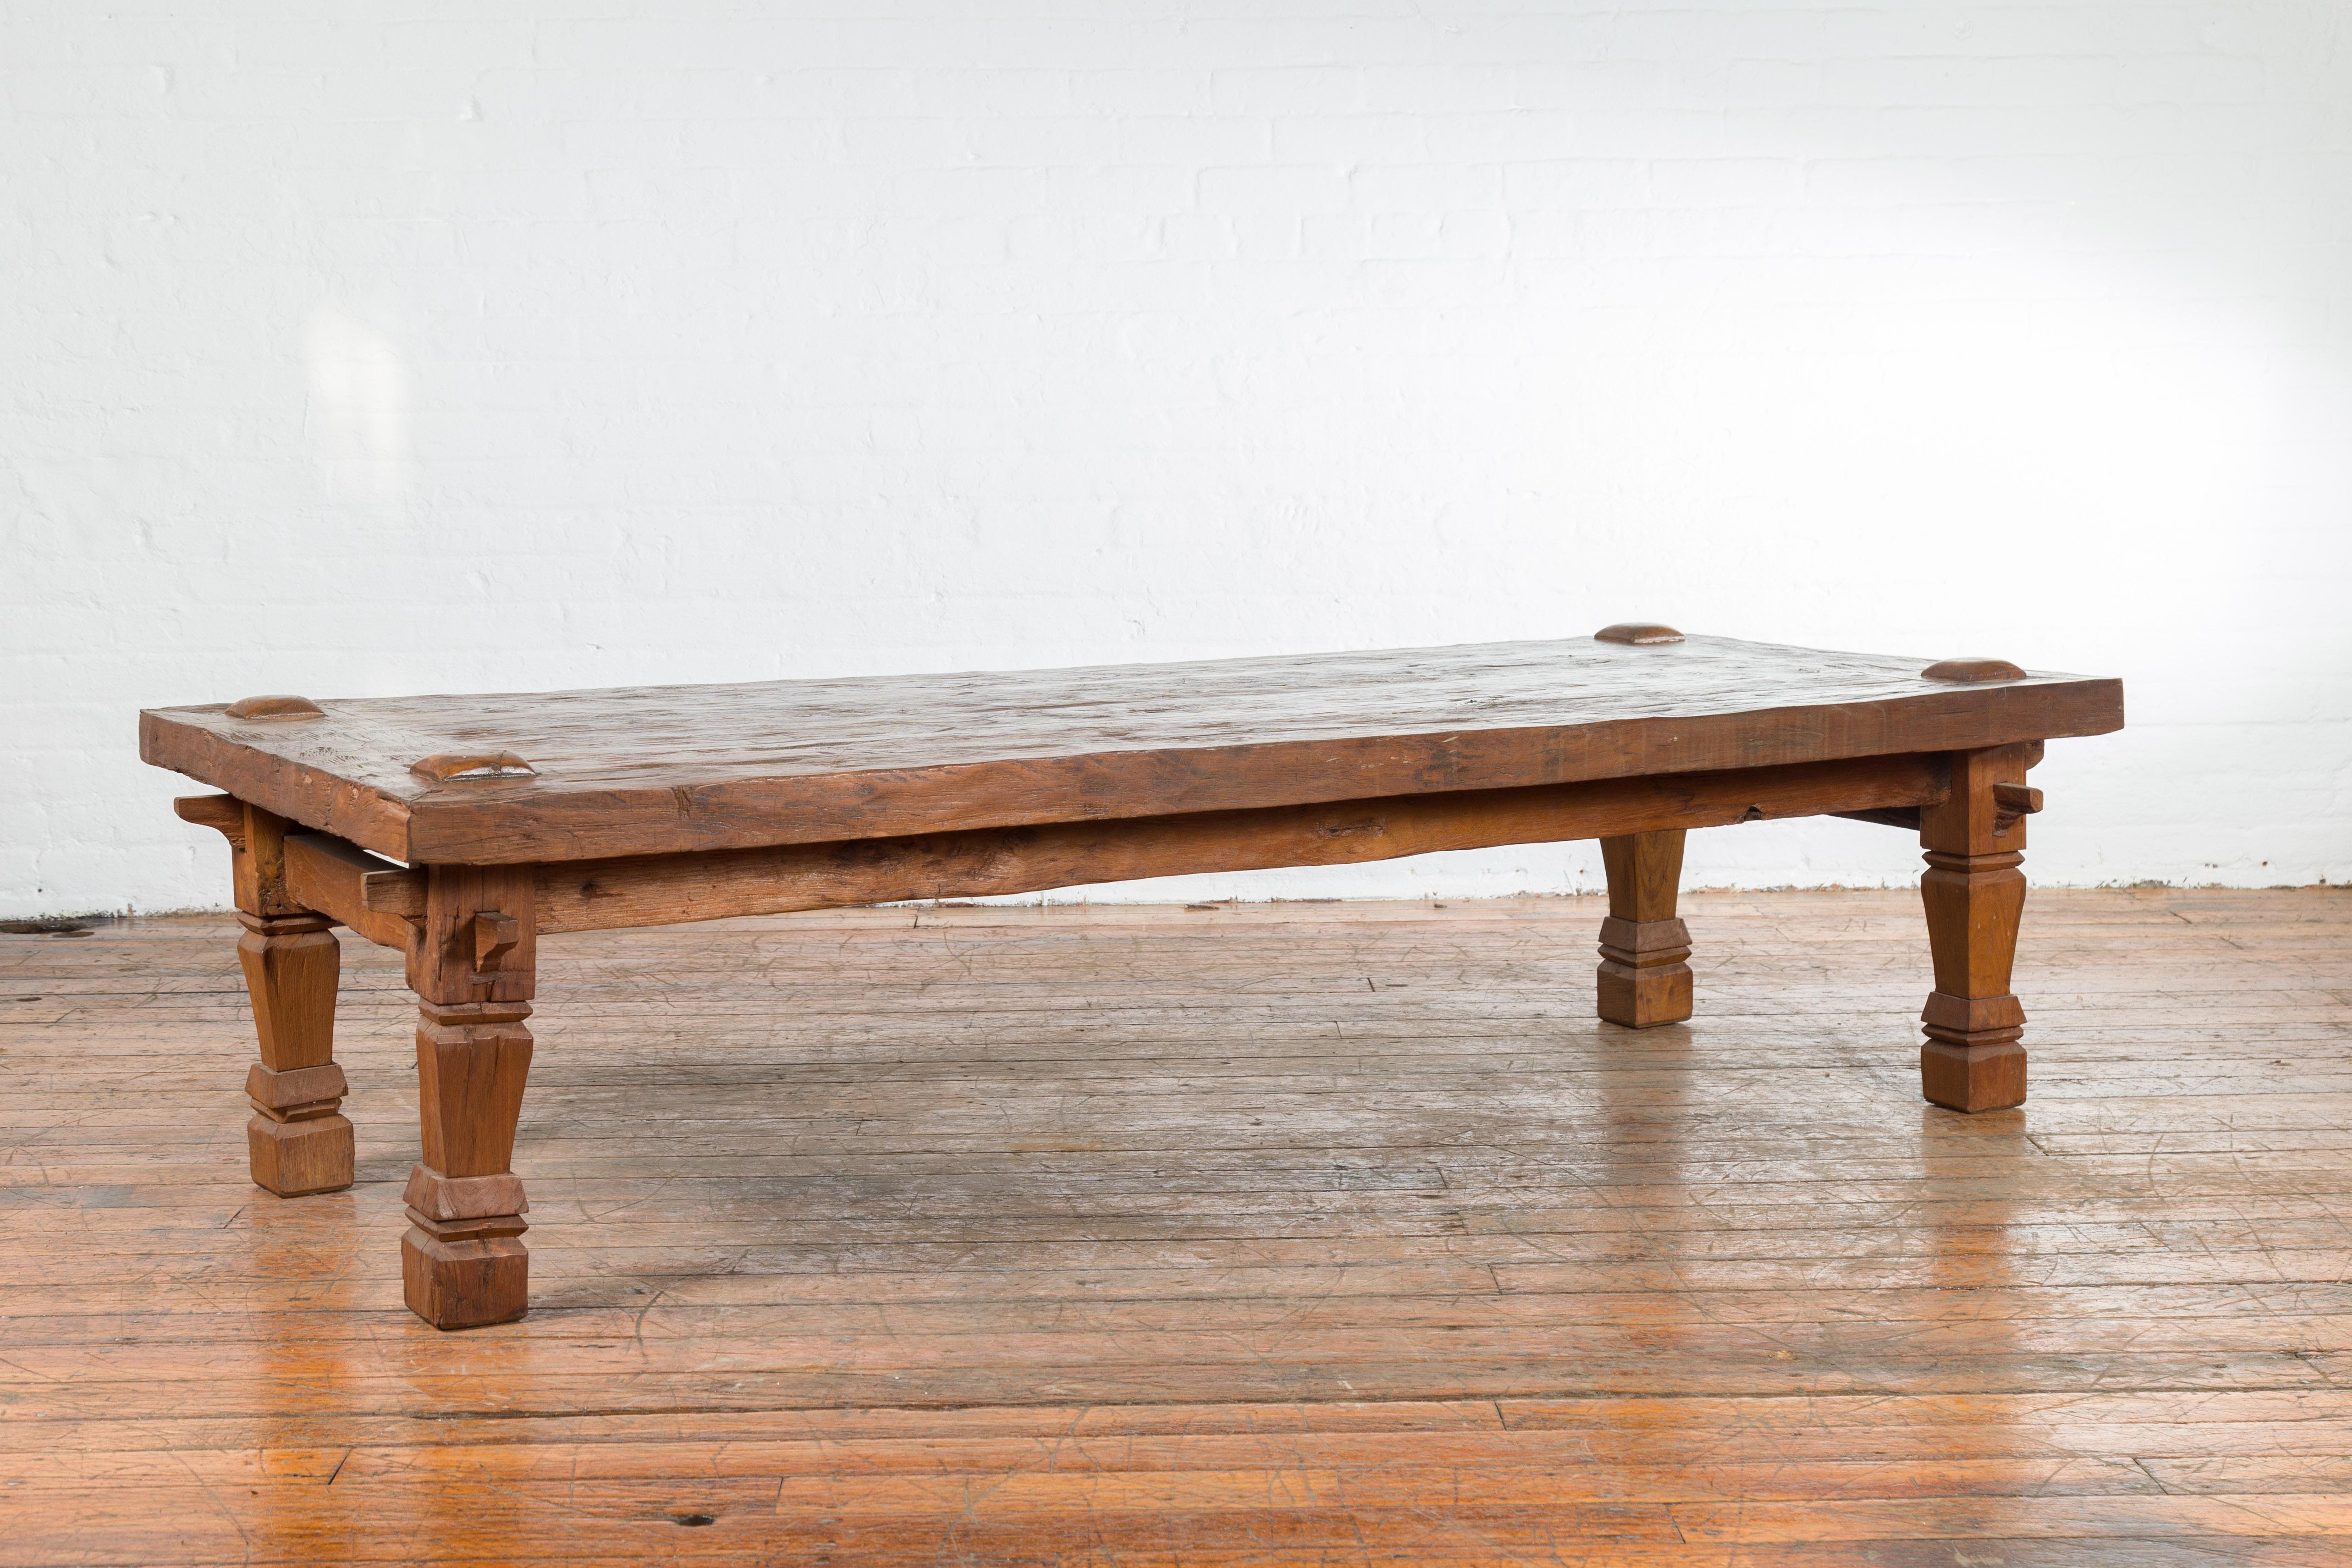 19th Century Indonesian Madurese Coffee Table with Carved Legs and Raised Joints For Sale 1